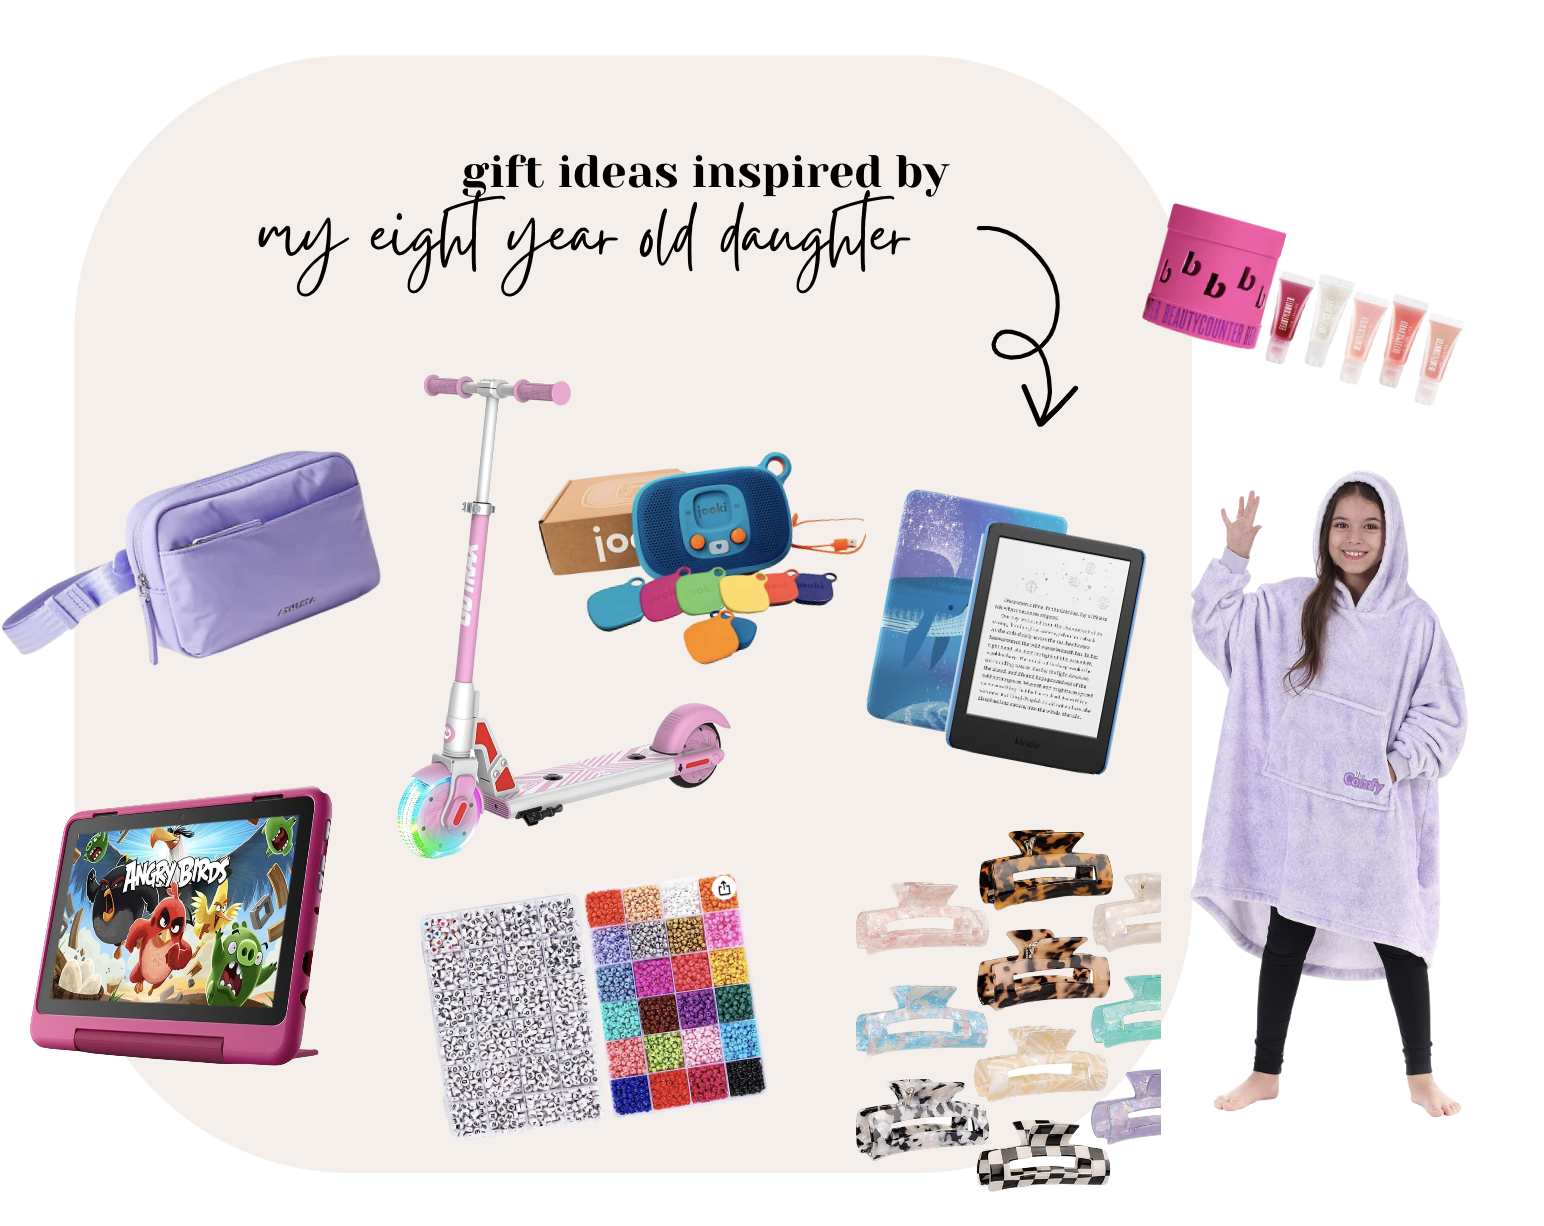 Our 10 Favorite Gifts for Girls This Holiday Season